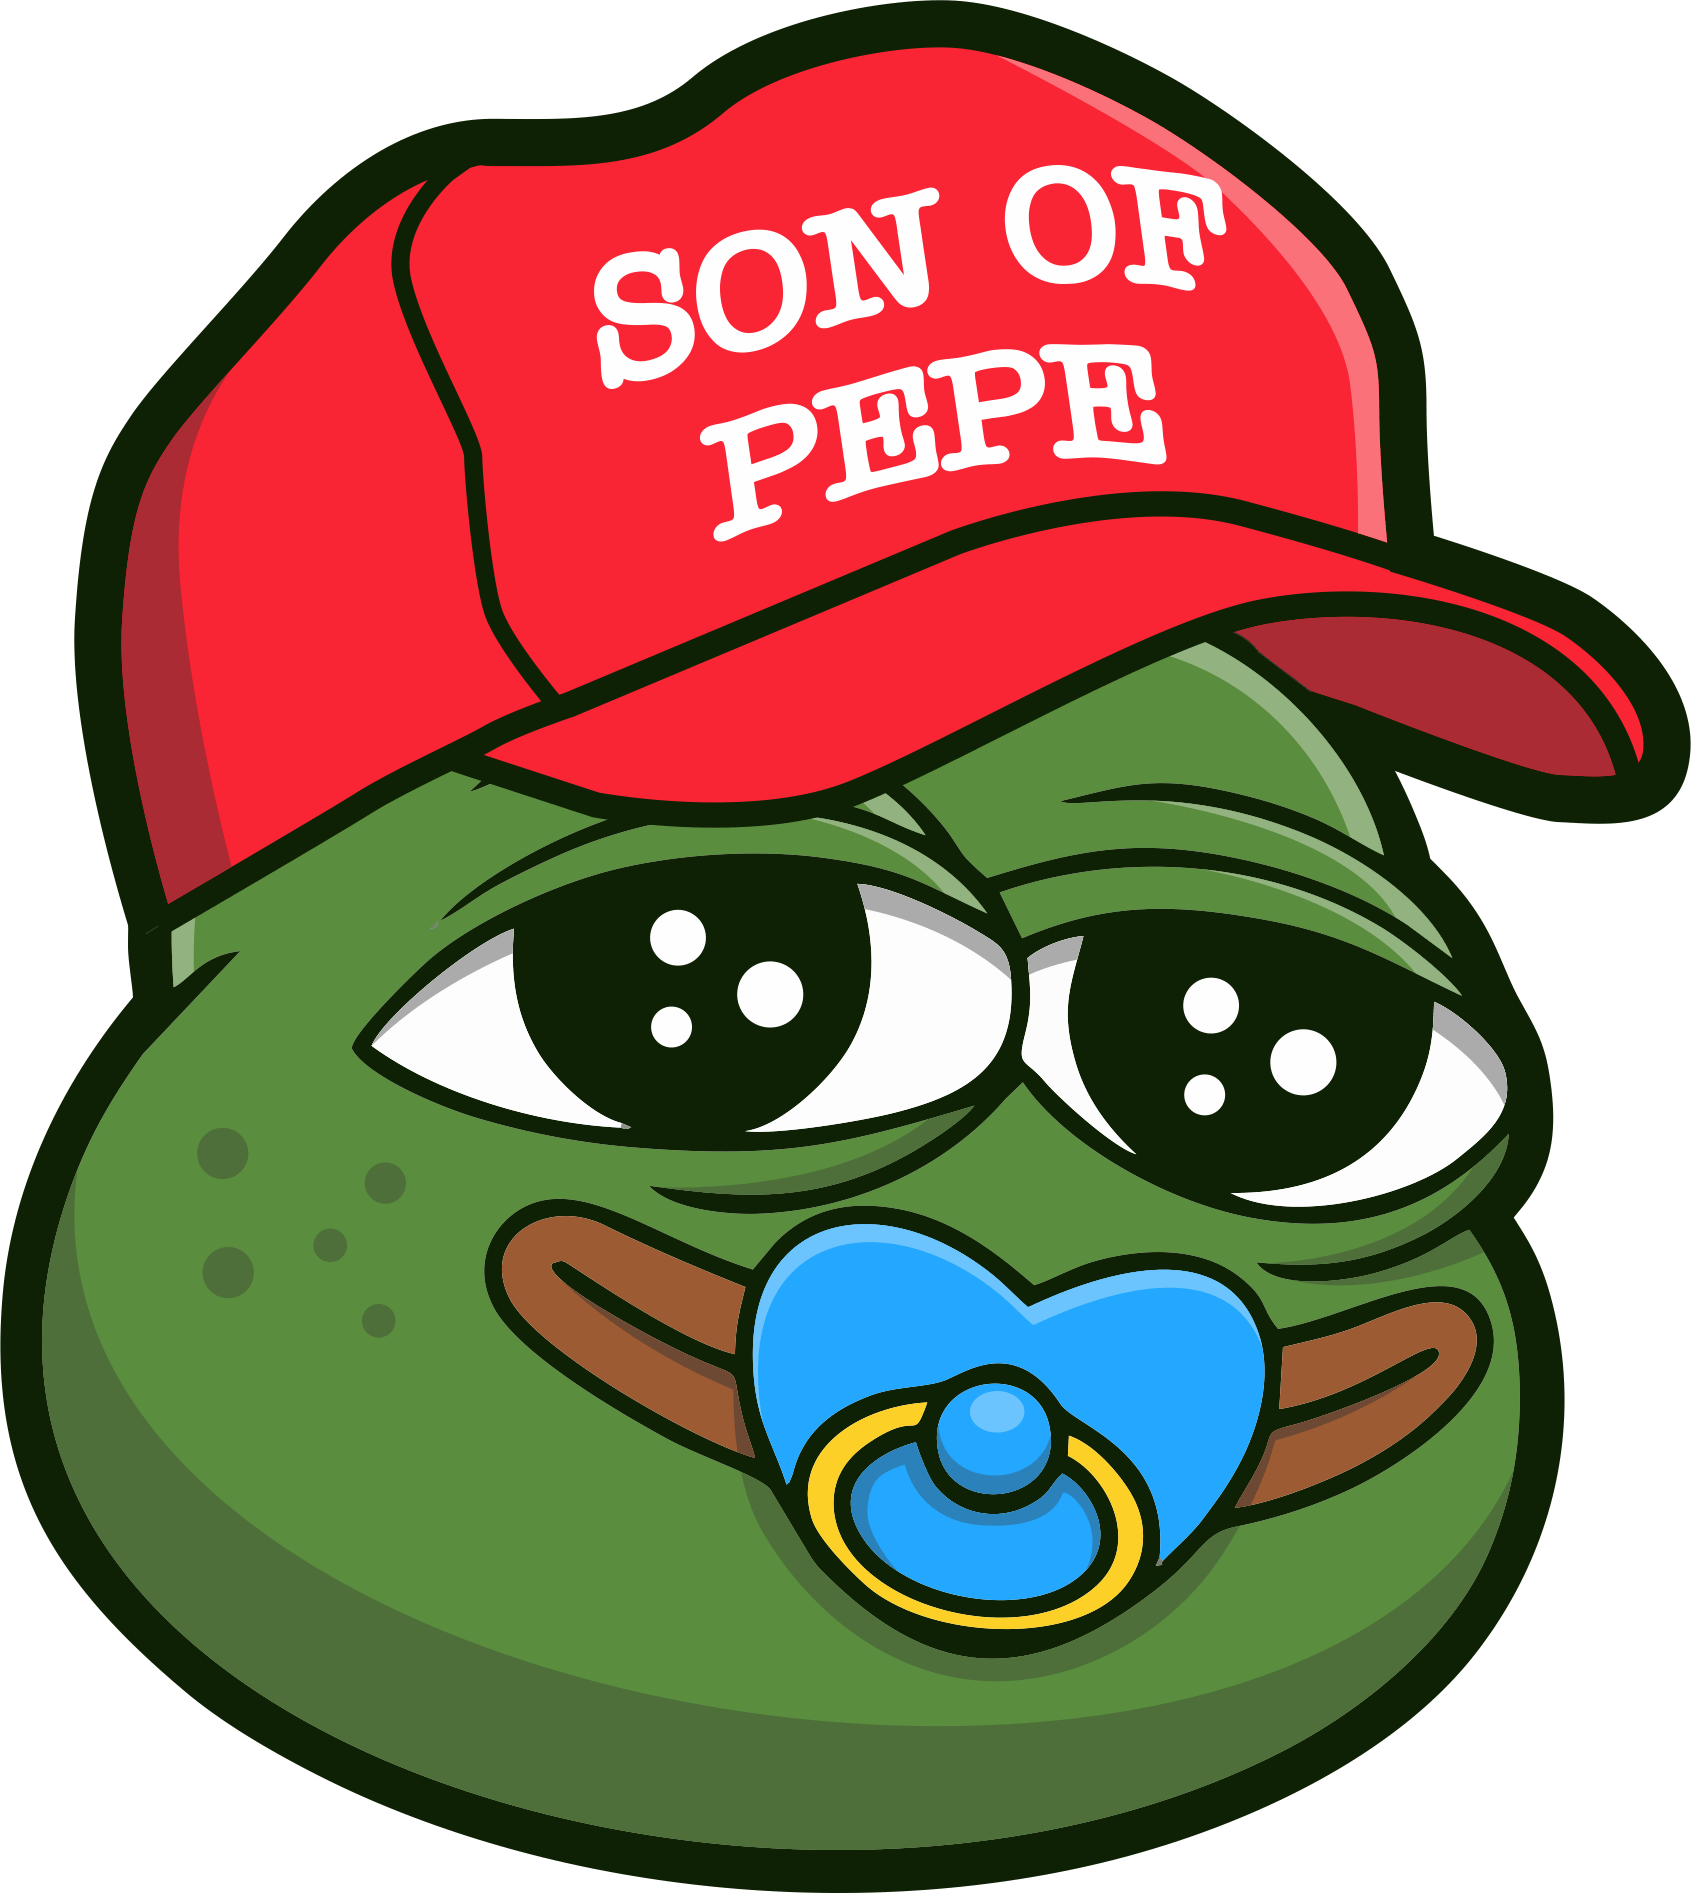 Son of Pepe (SOP) Achieved Phenomenal 1000% Growth Within